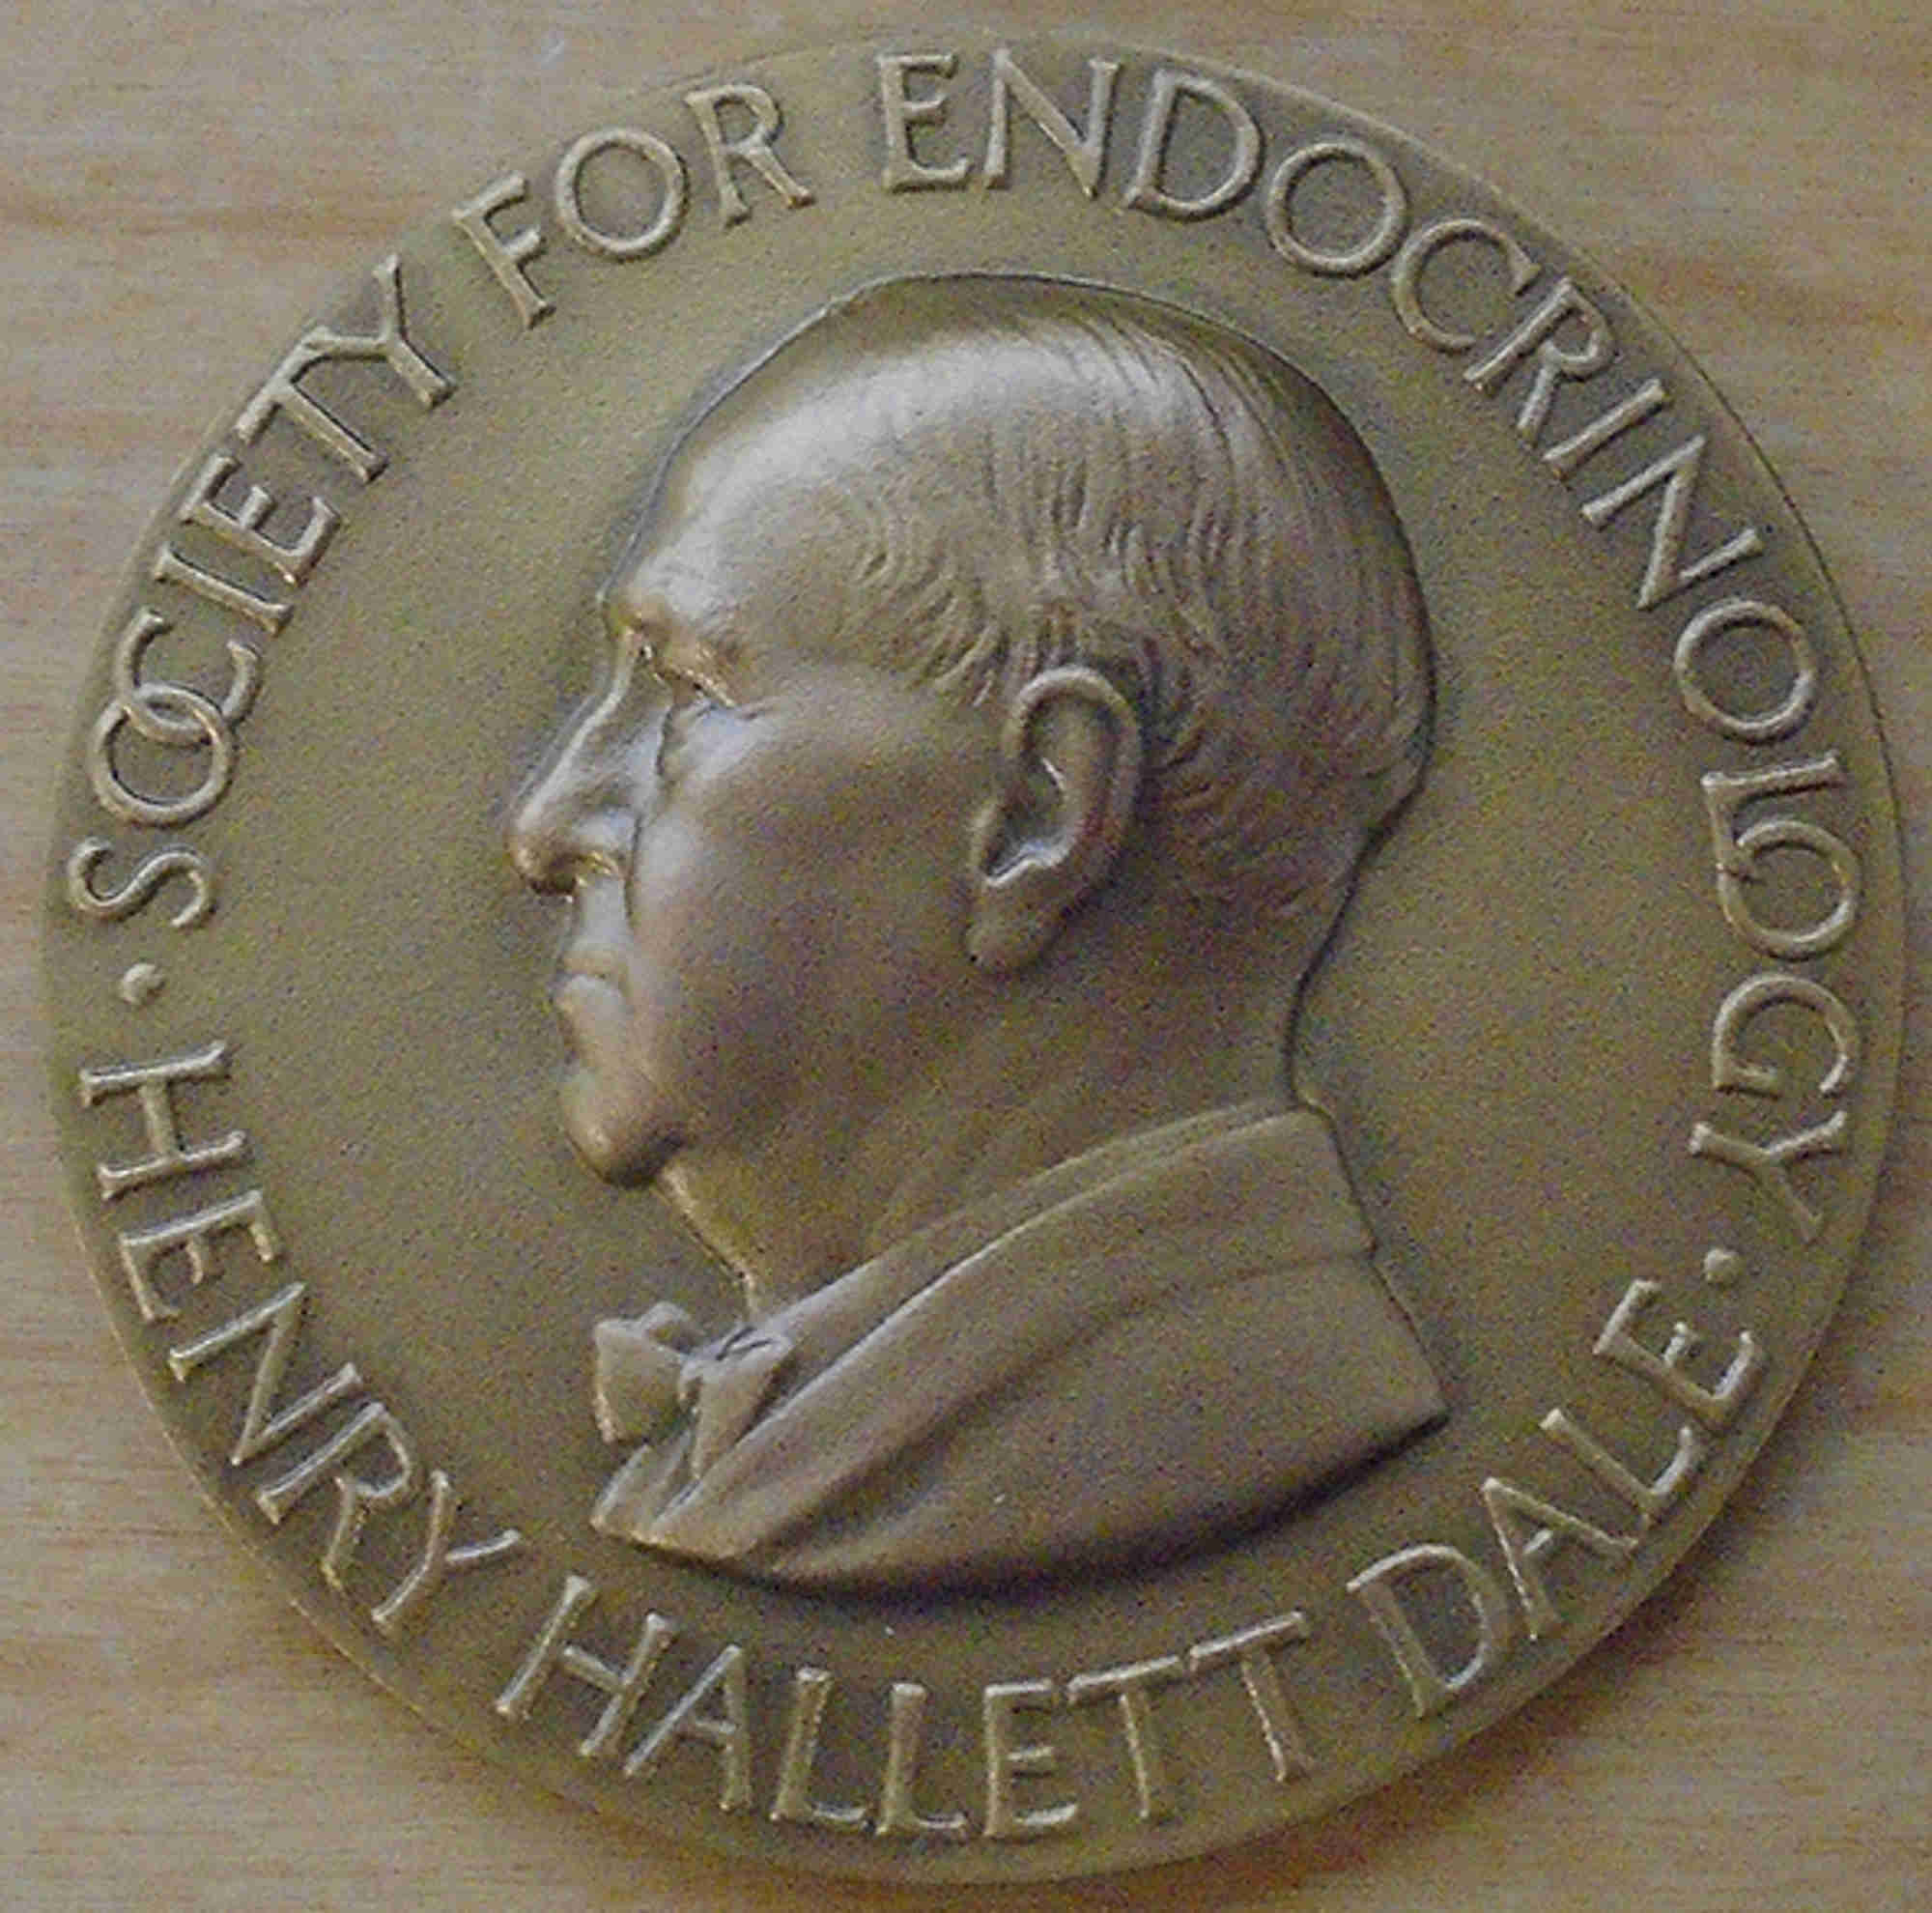 The Dale Medal